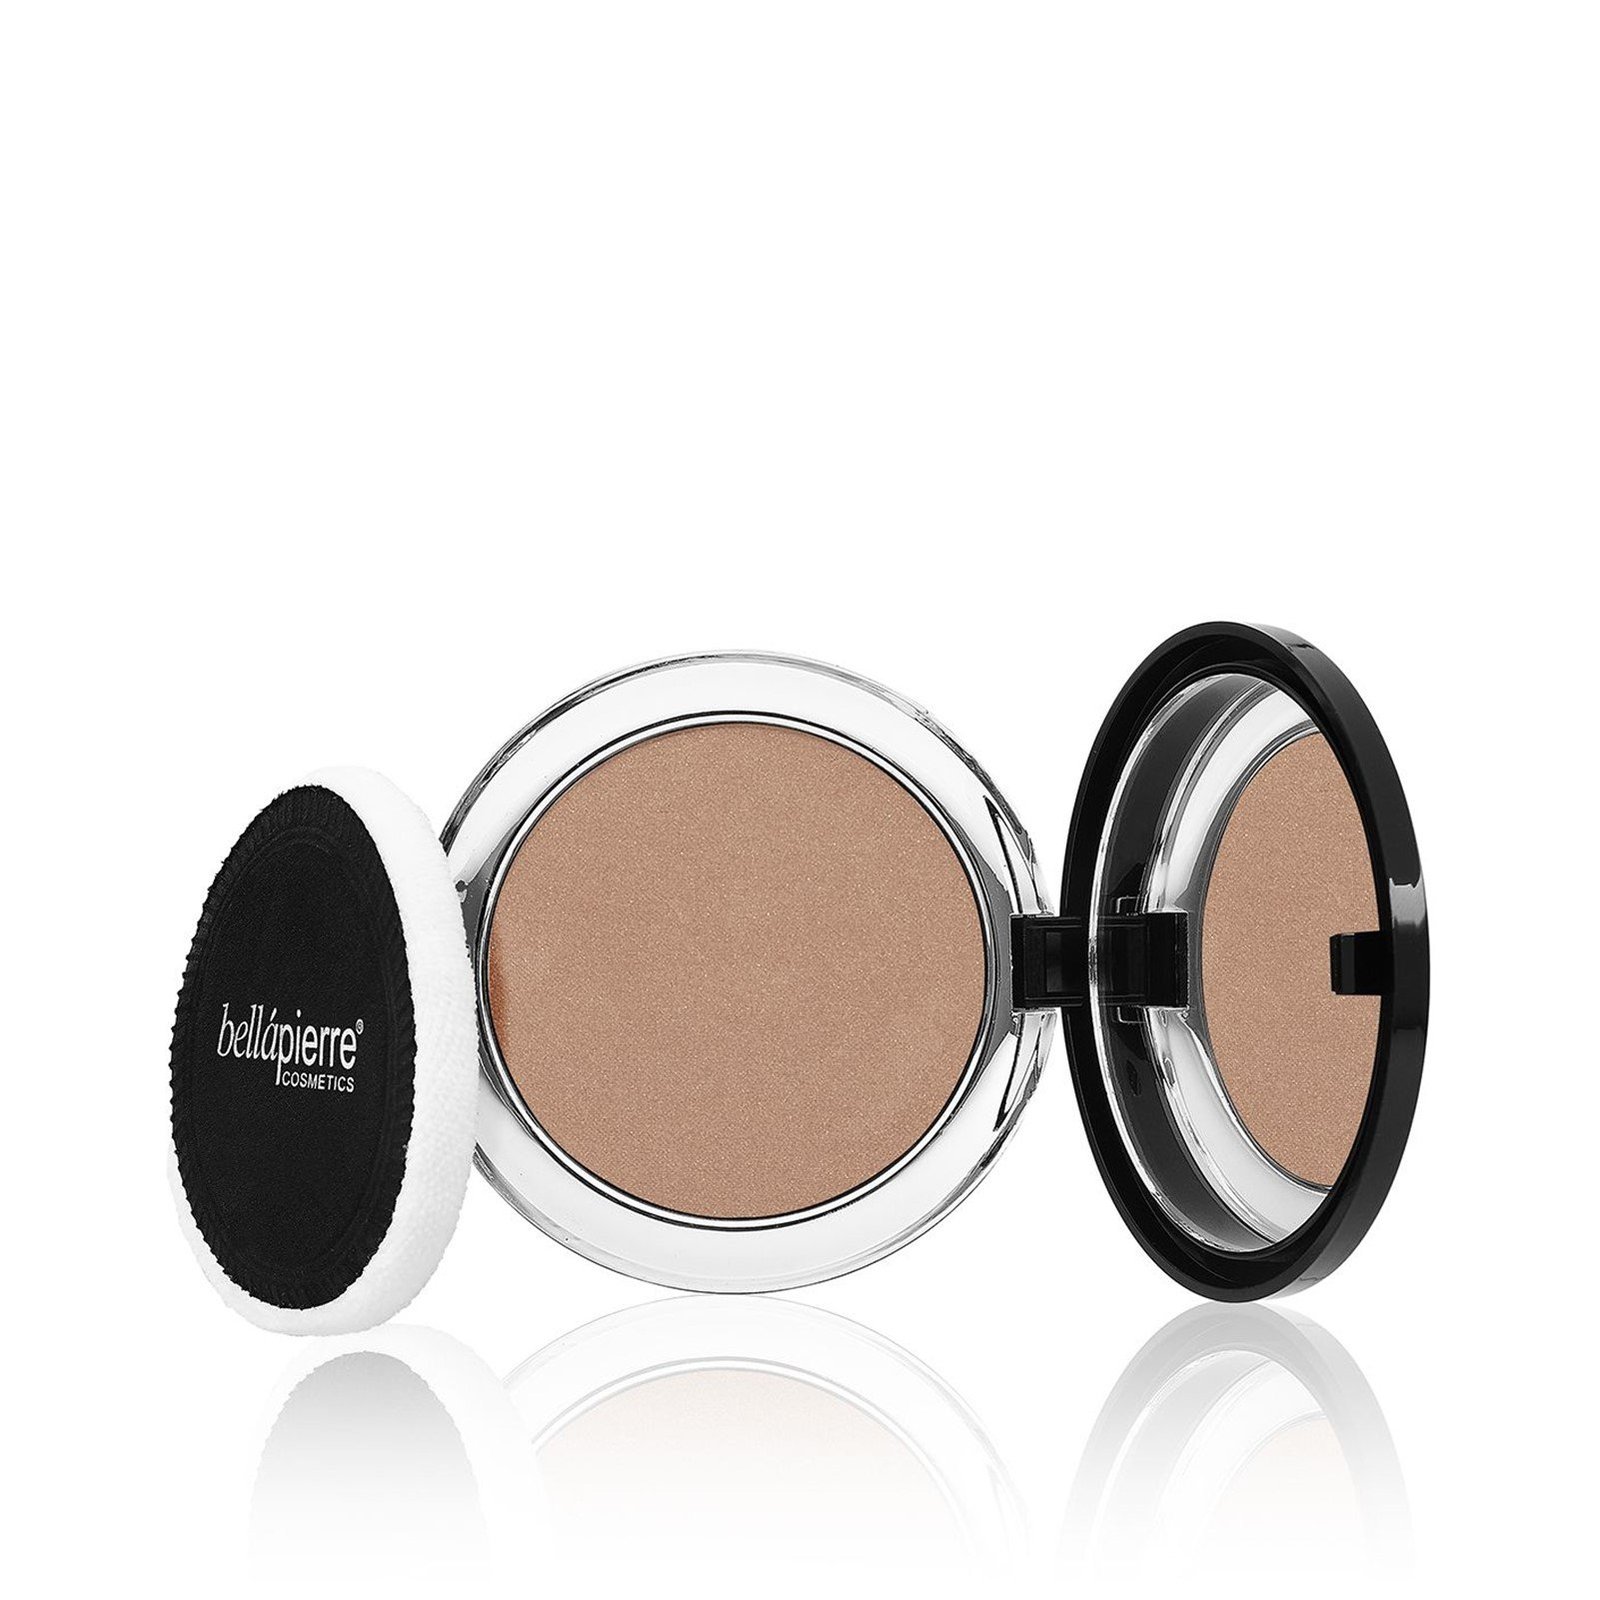 Bellapierre Cosmetics Compact Mineral Face & Body Bronzer Pure Element 10g (0.35oz)